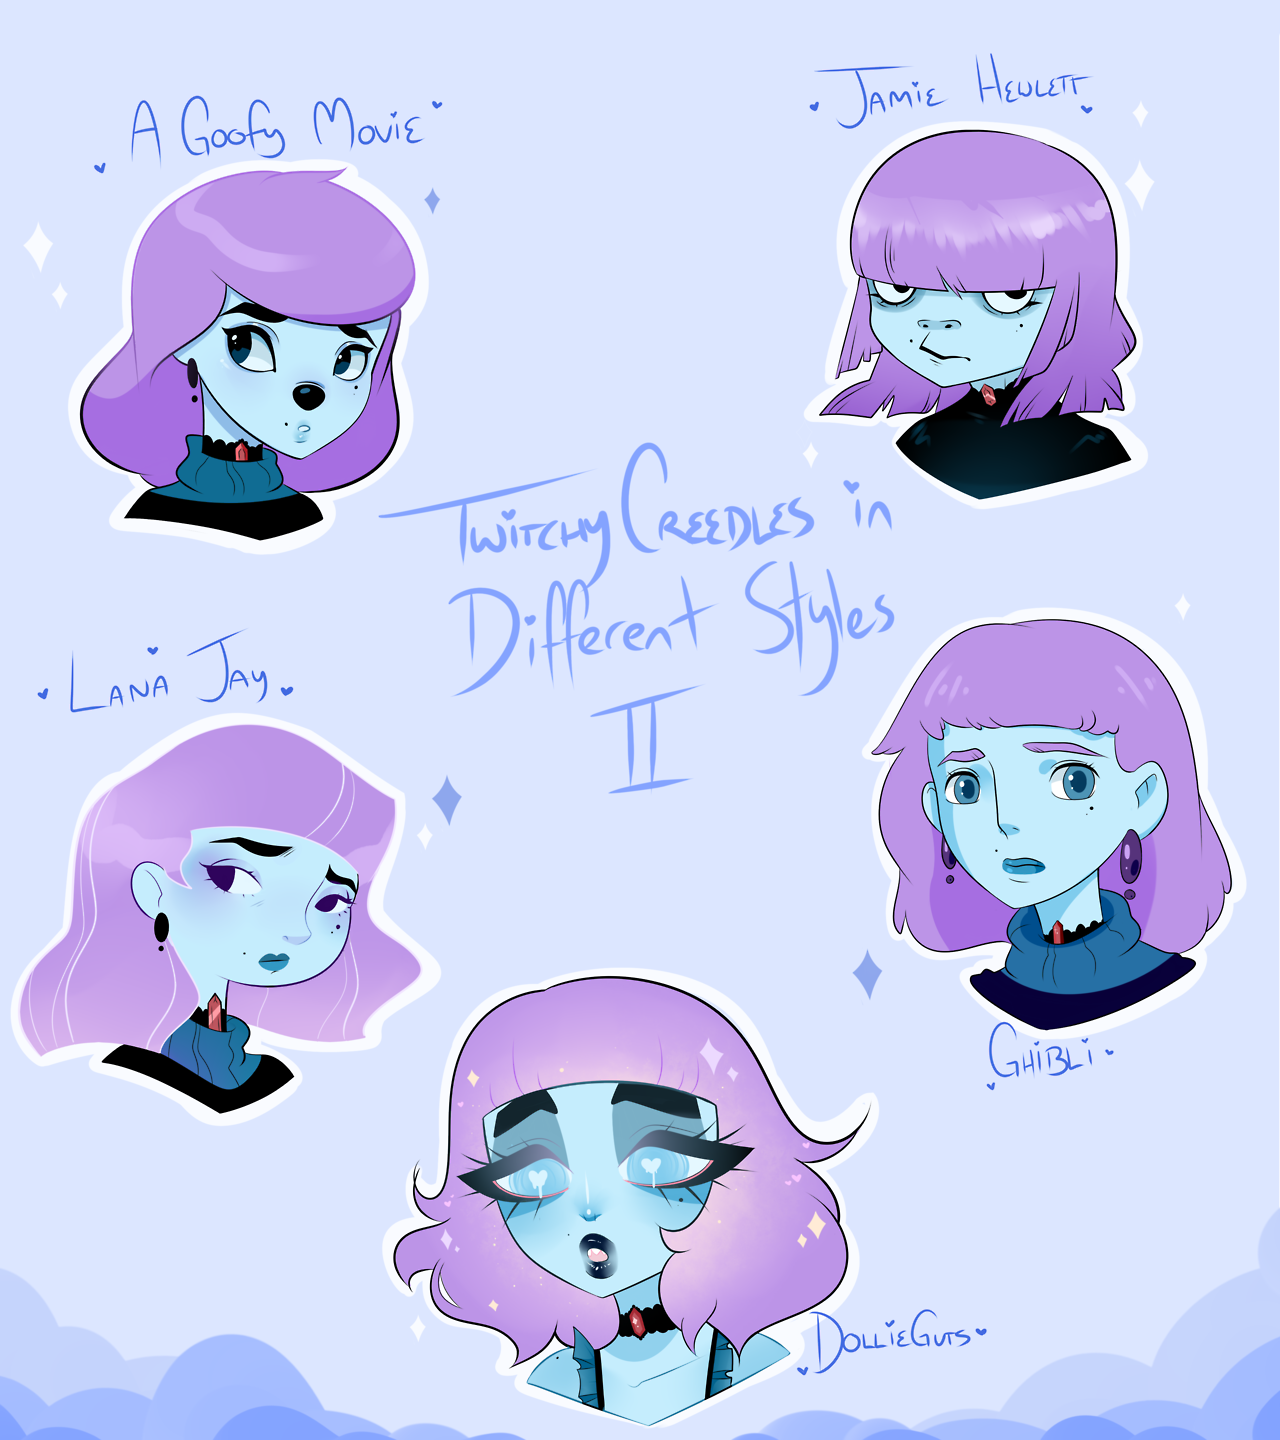 Art Styles Meme IIthis was so much fun to do! Check out Lana Jay https://www.instagram.com/lanajay_art/ Jamie